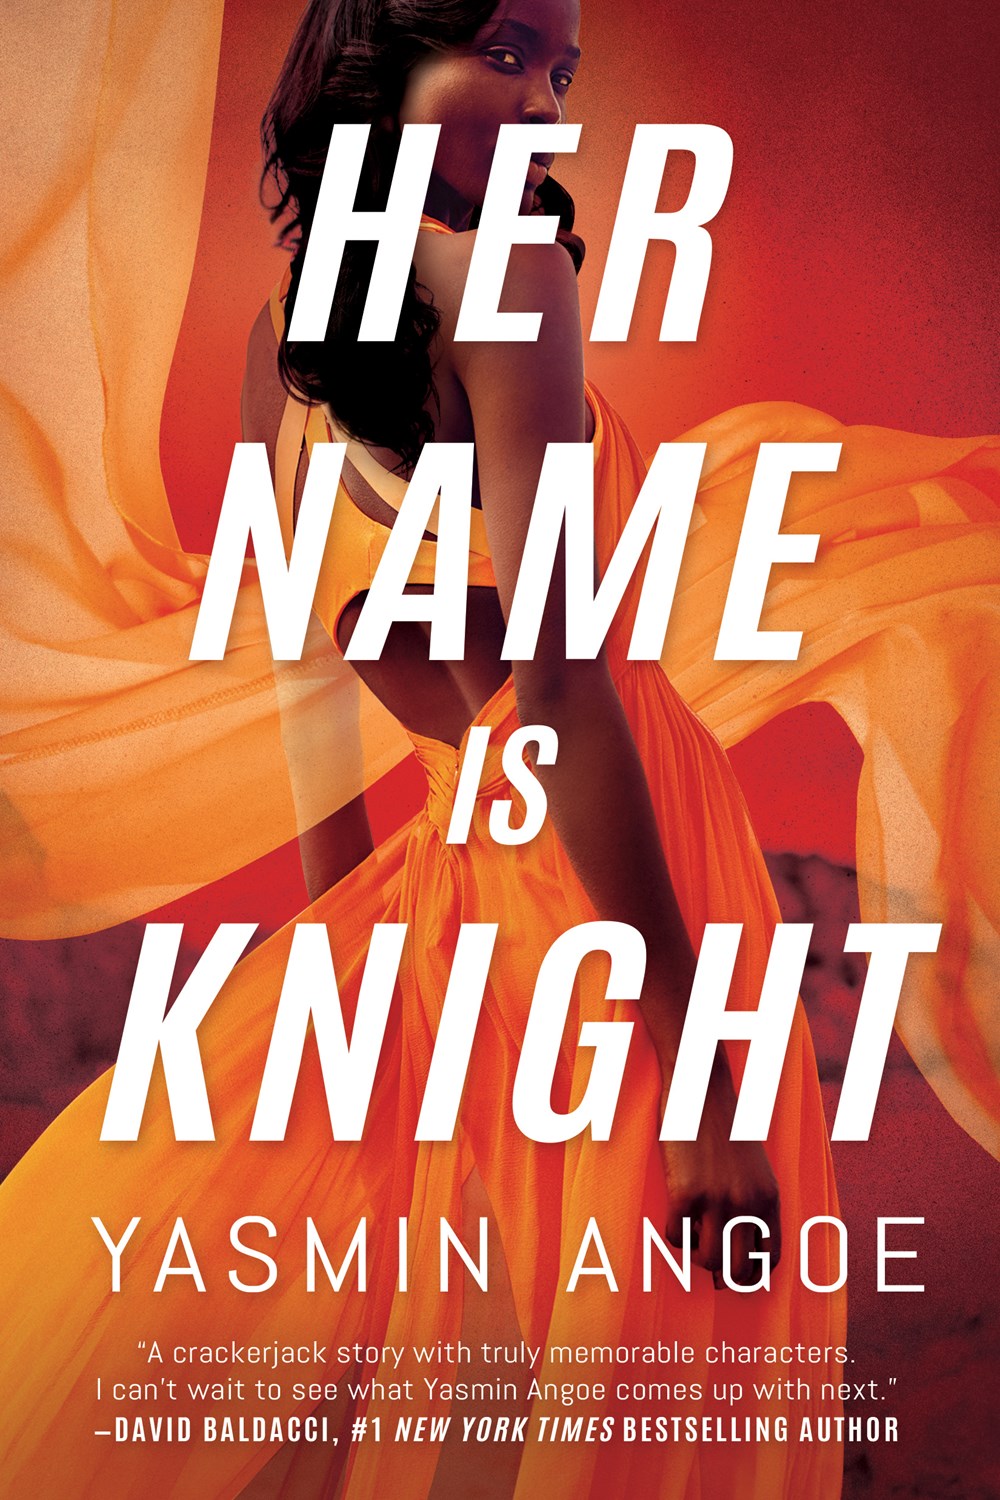 Image for "Her Name is Knight"